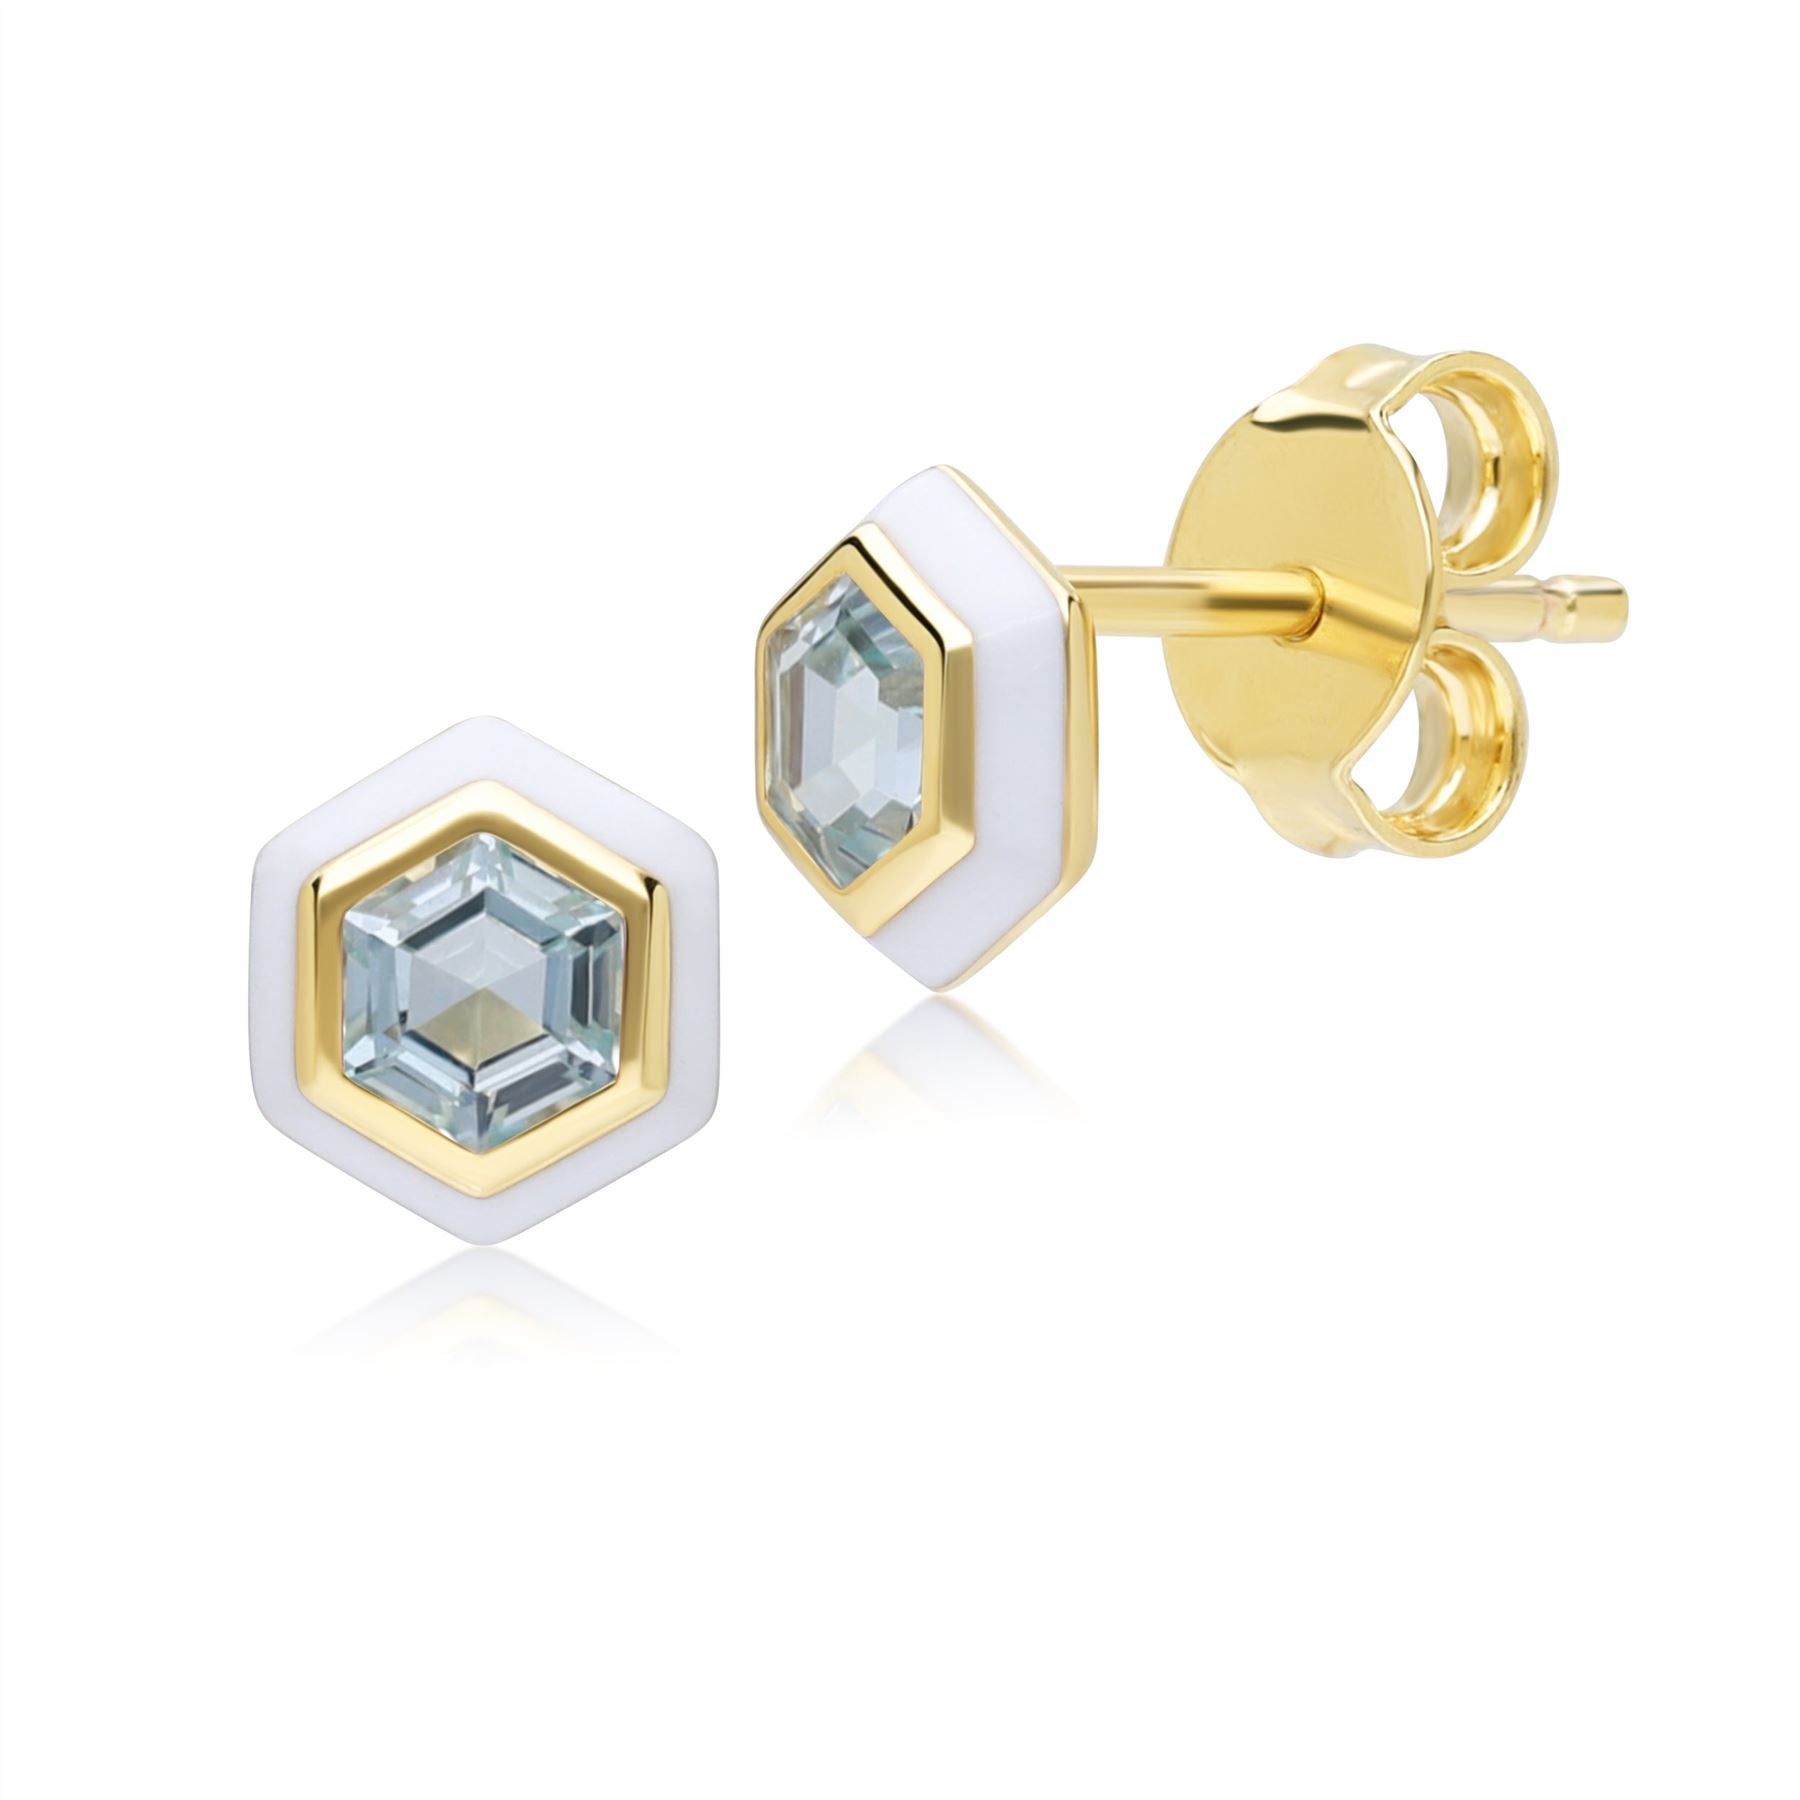 Geometric Hex Blue Topaz and White Enamel Stud Earrings in Gold Plated Sterling Silver Front